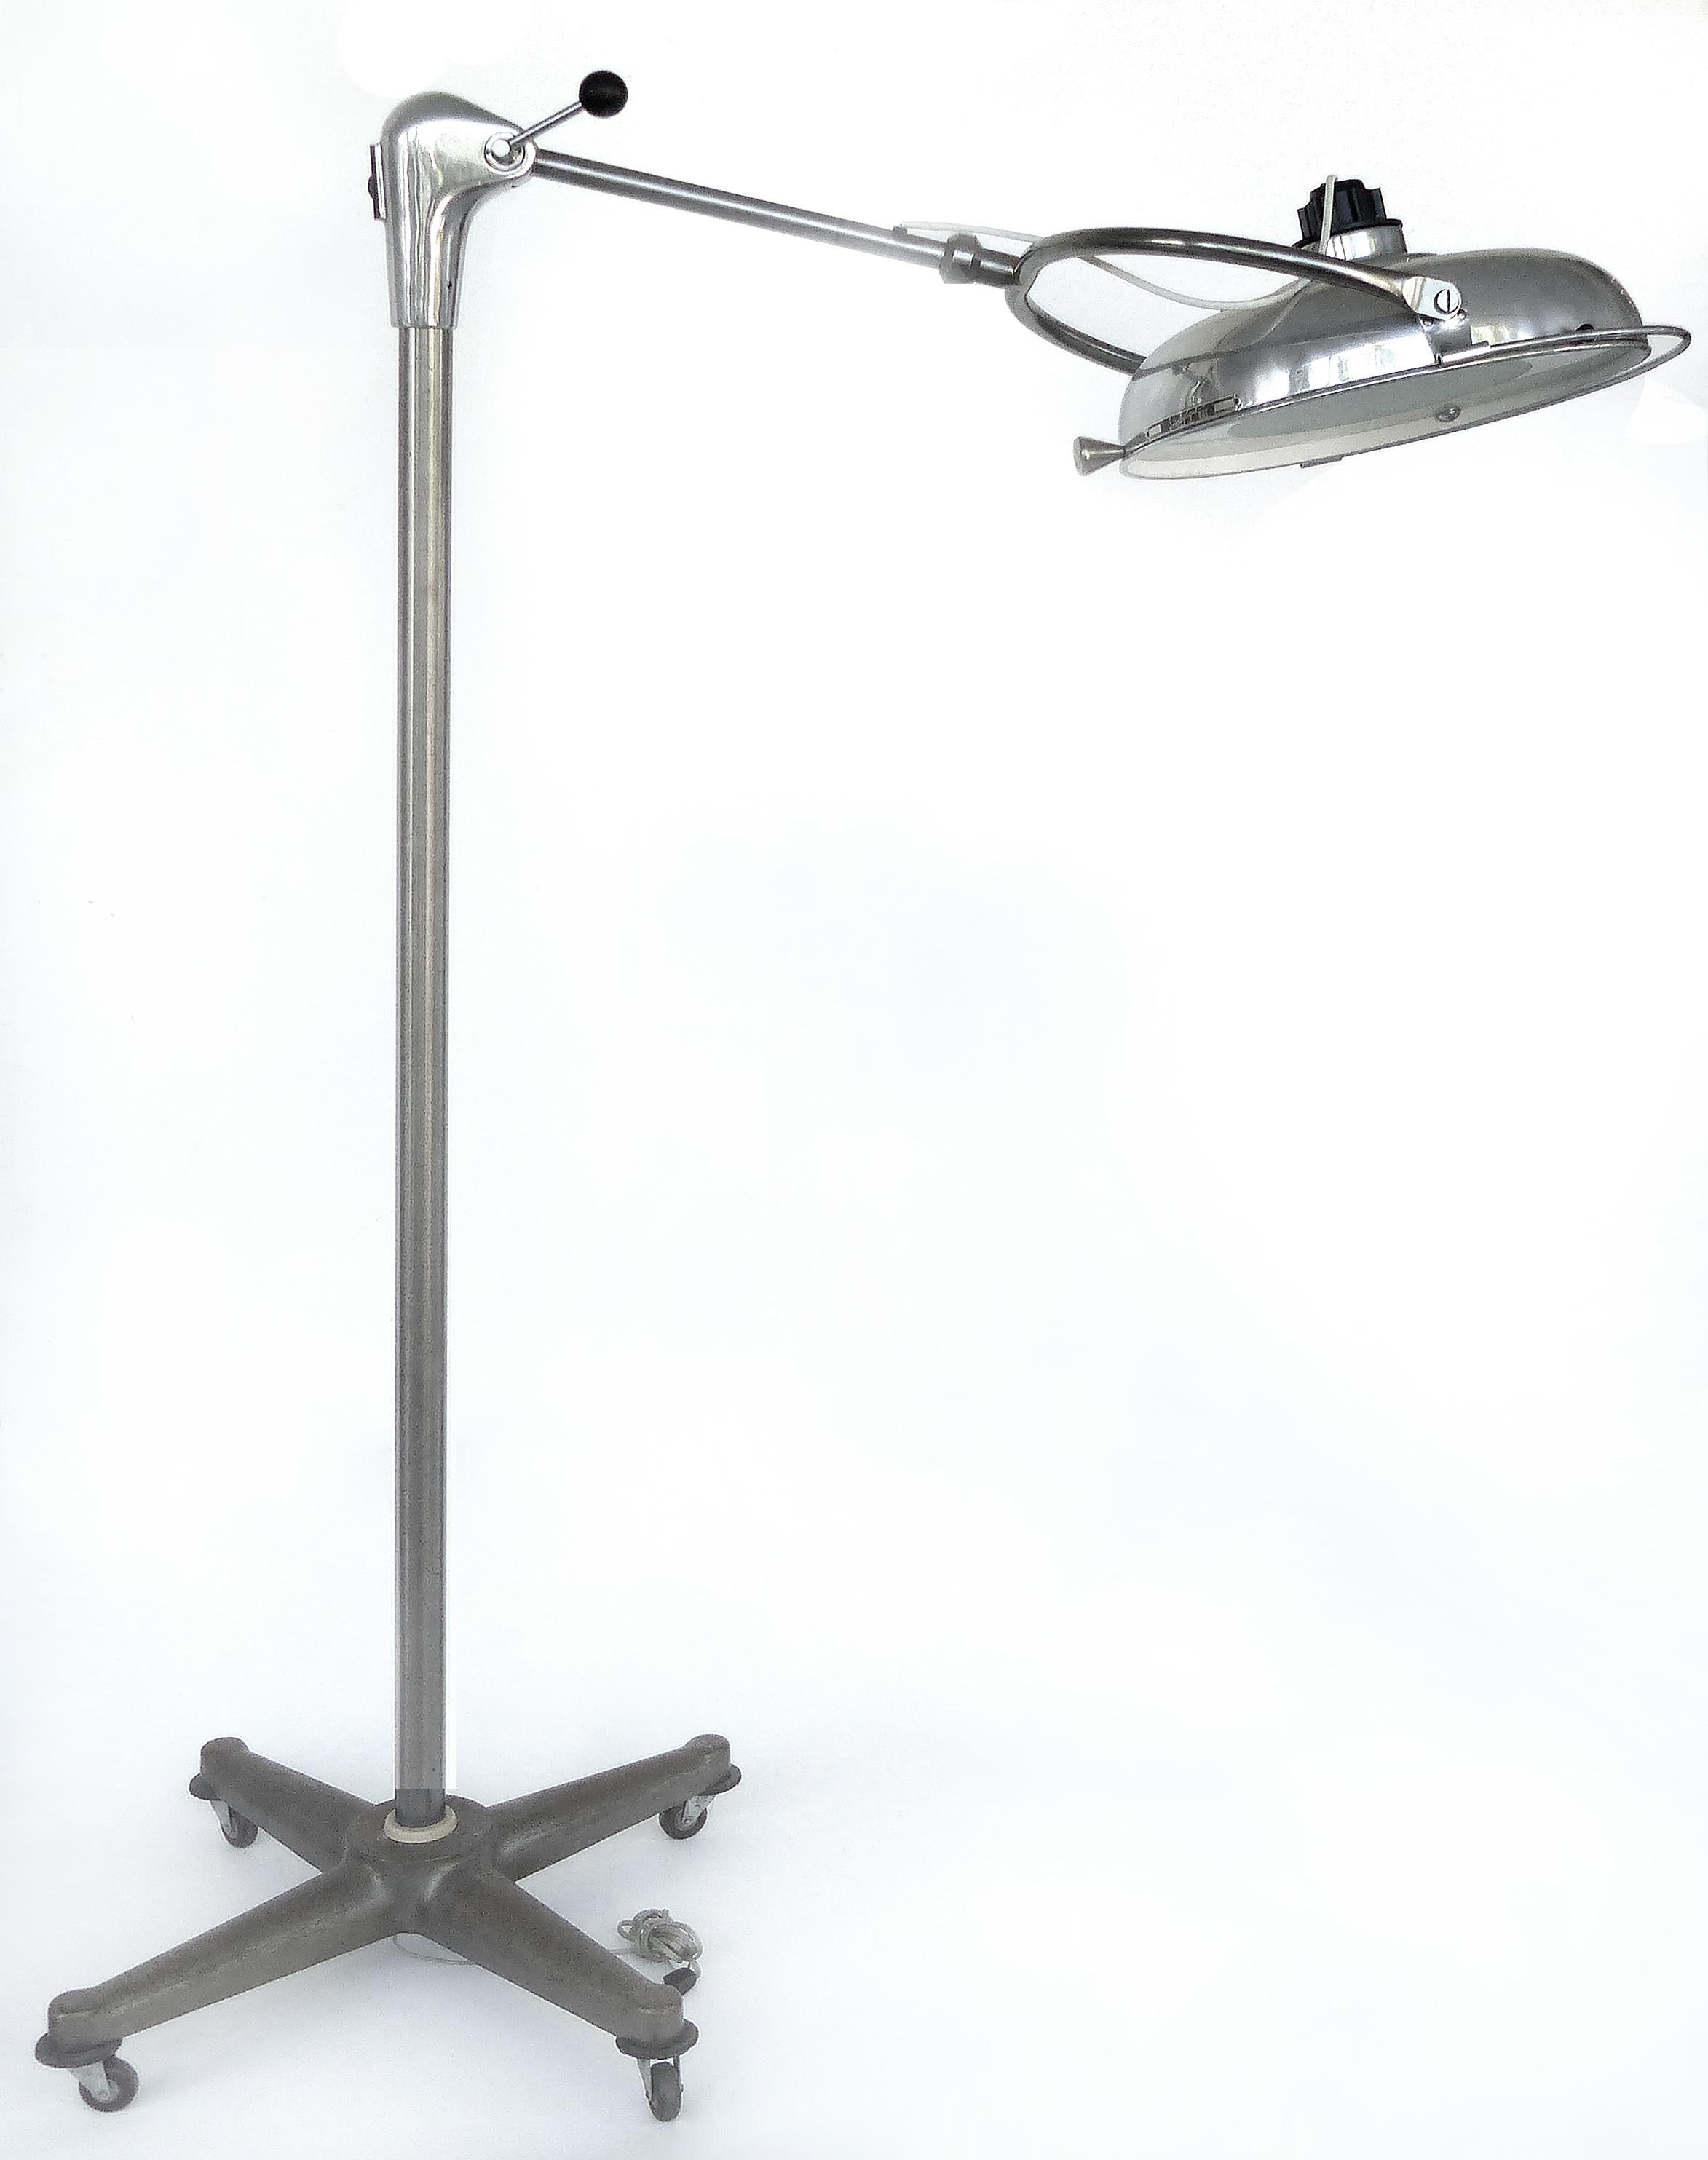 Scialytique French Industrial Surgical Floor Lamp with Pivoting Adjustable Arm

Offered for sale is a French industrial surgical light with a pivoting and adjustable arm. The floor lamp is made of aluminum, iron and glass. The arm has a lever which